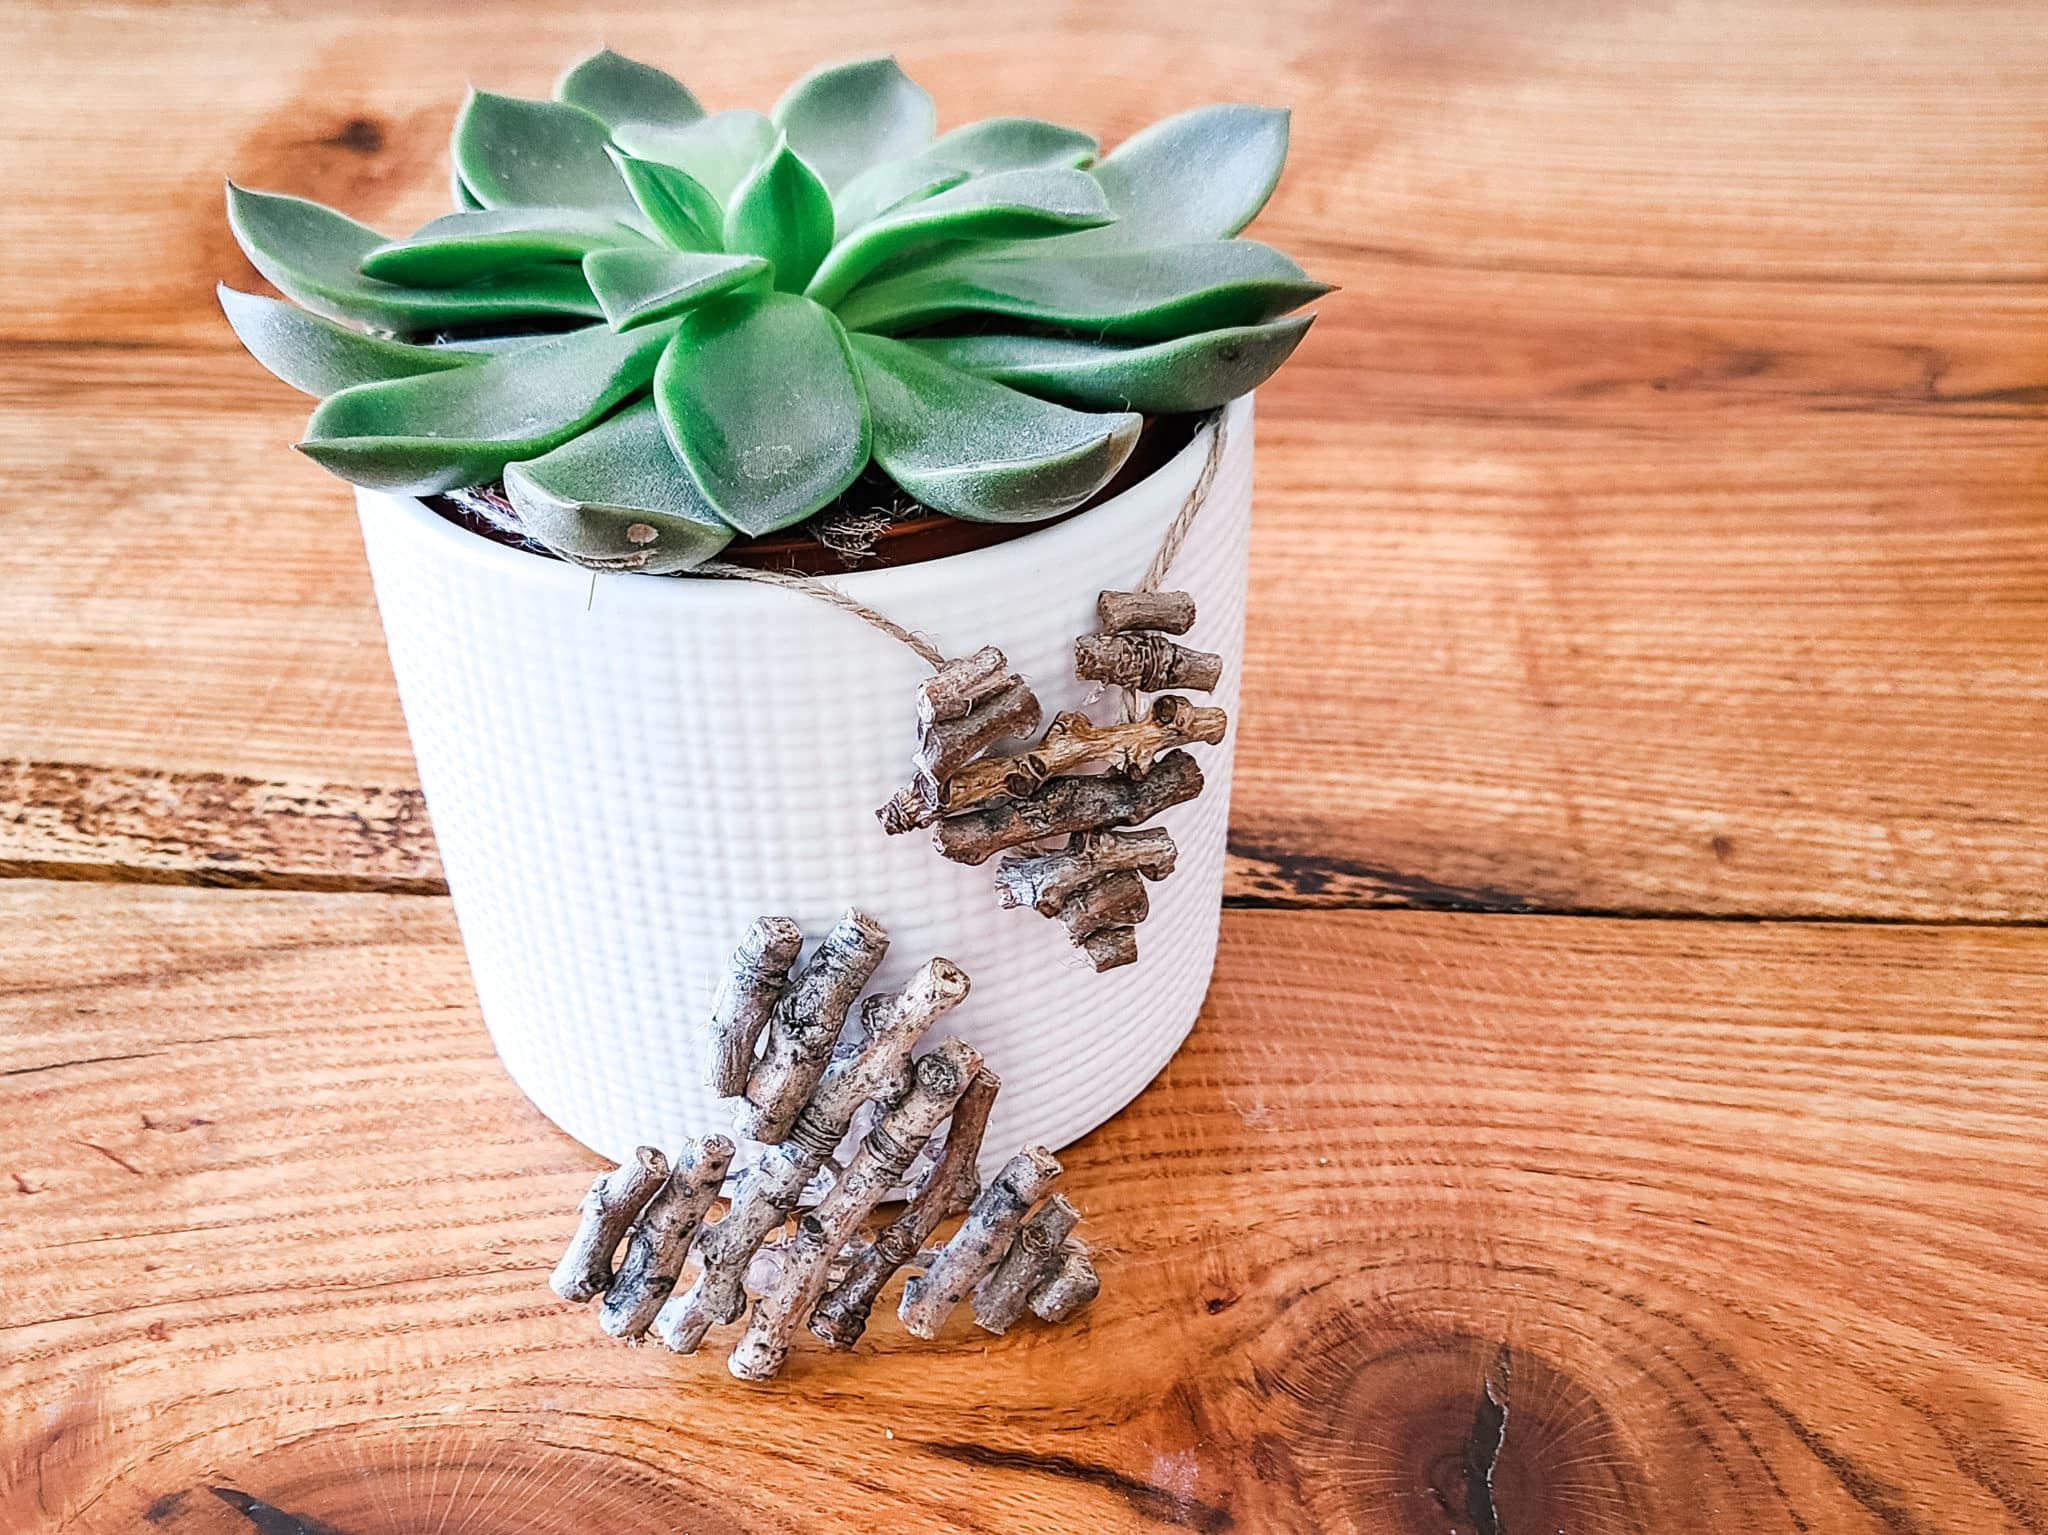 Eco-friendly Gift Idea for Mother's Day - Potted Plant or Plant Subscription